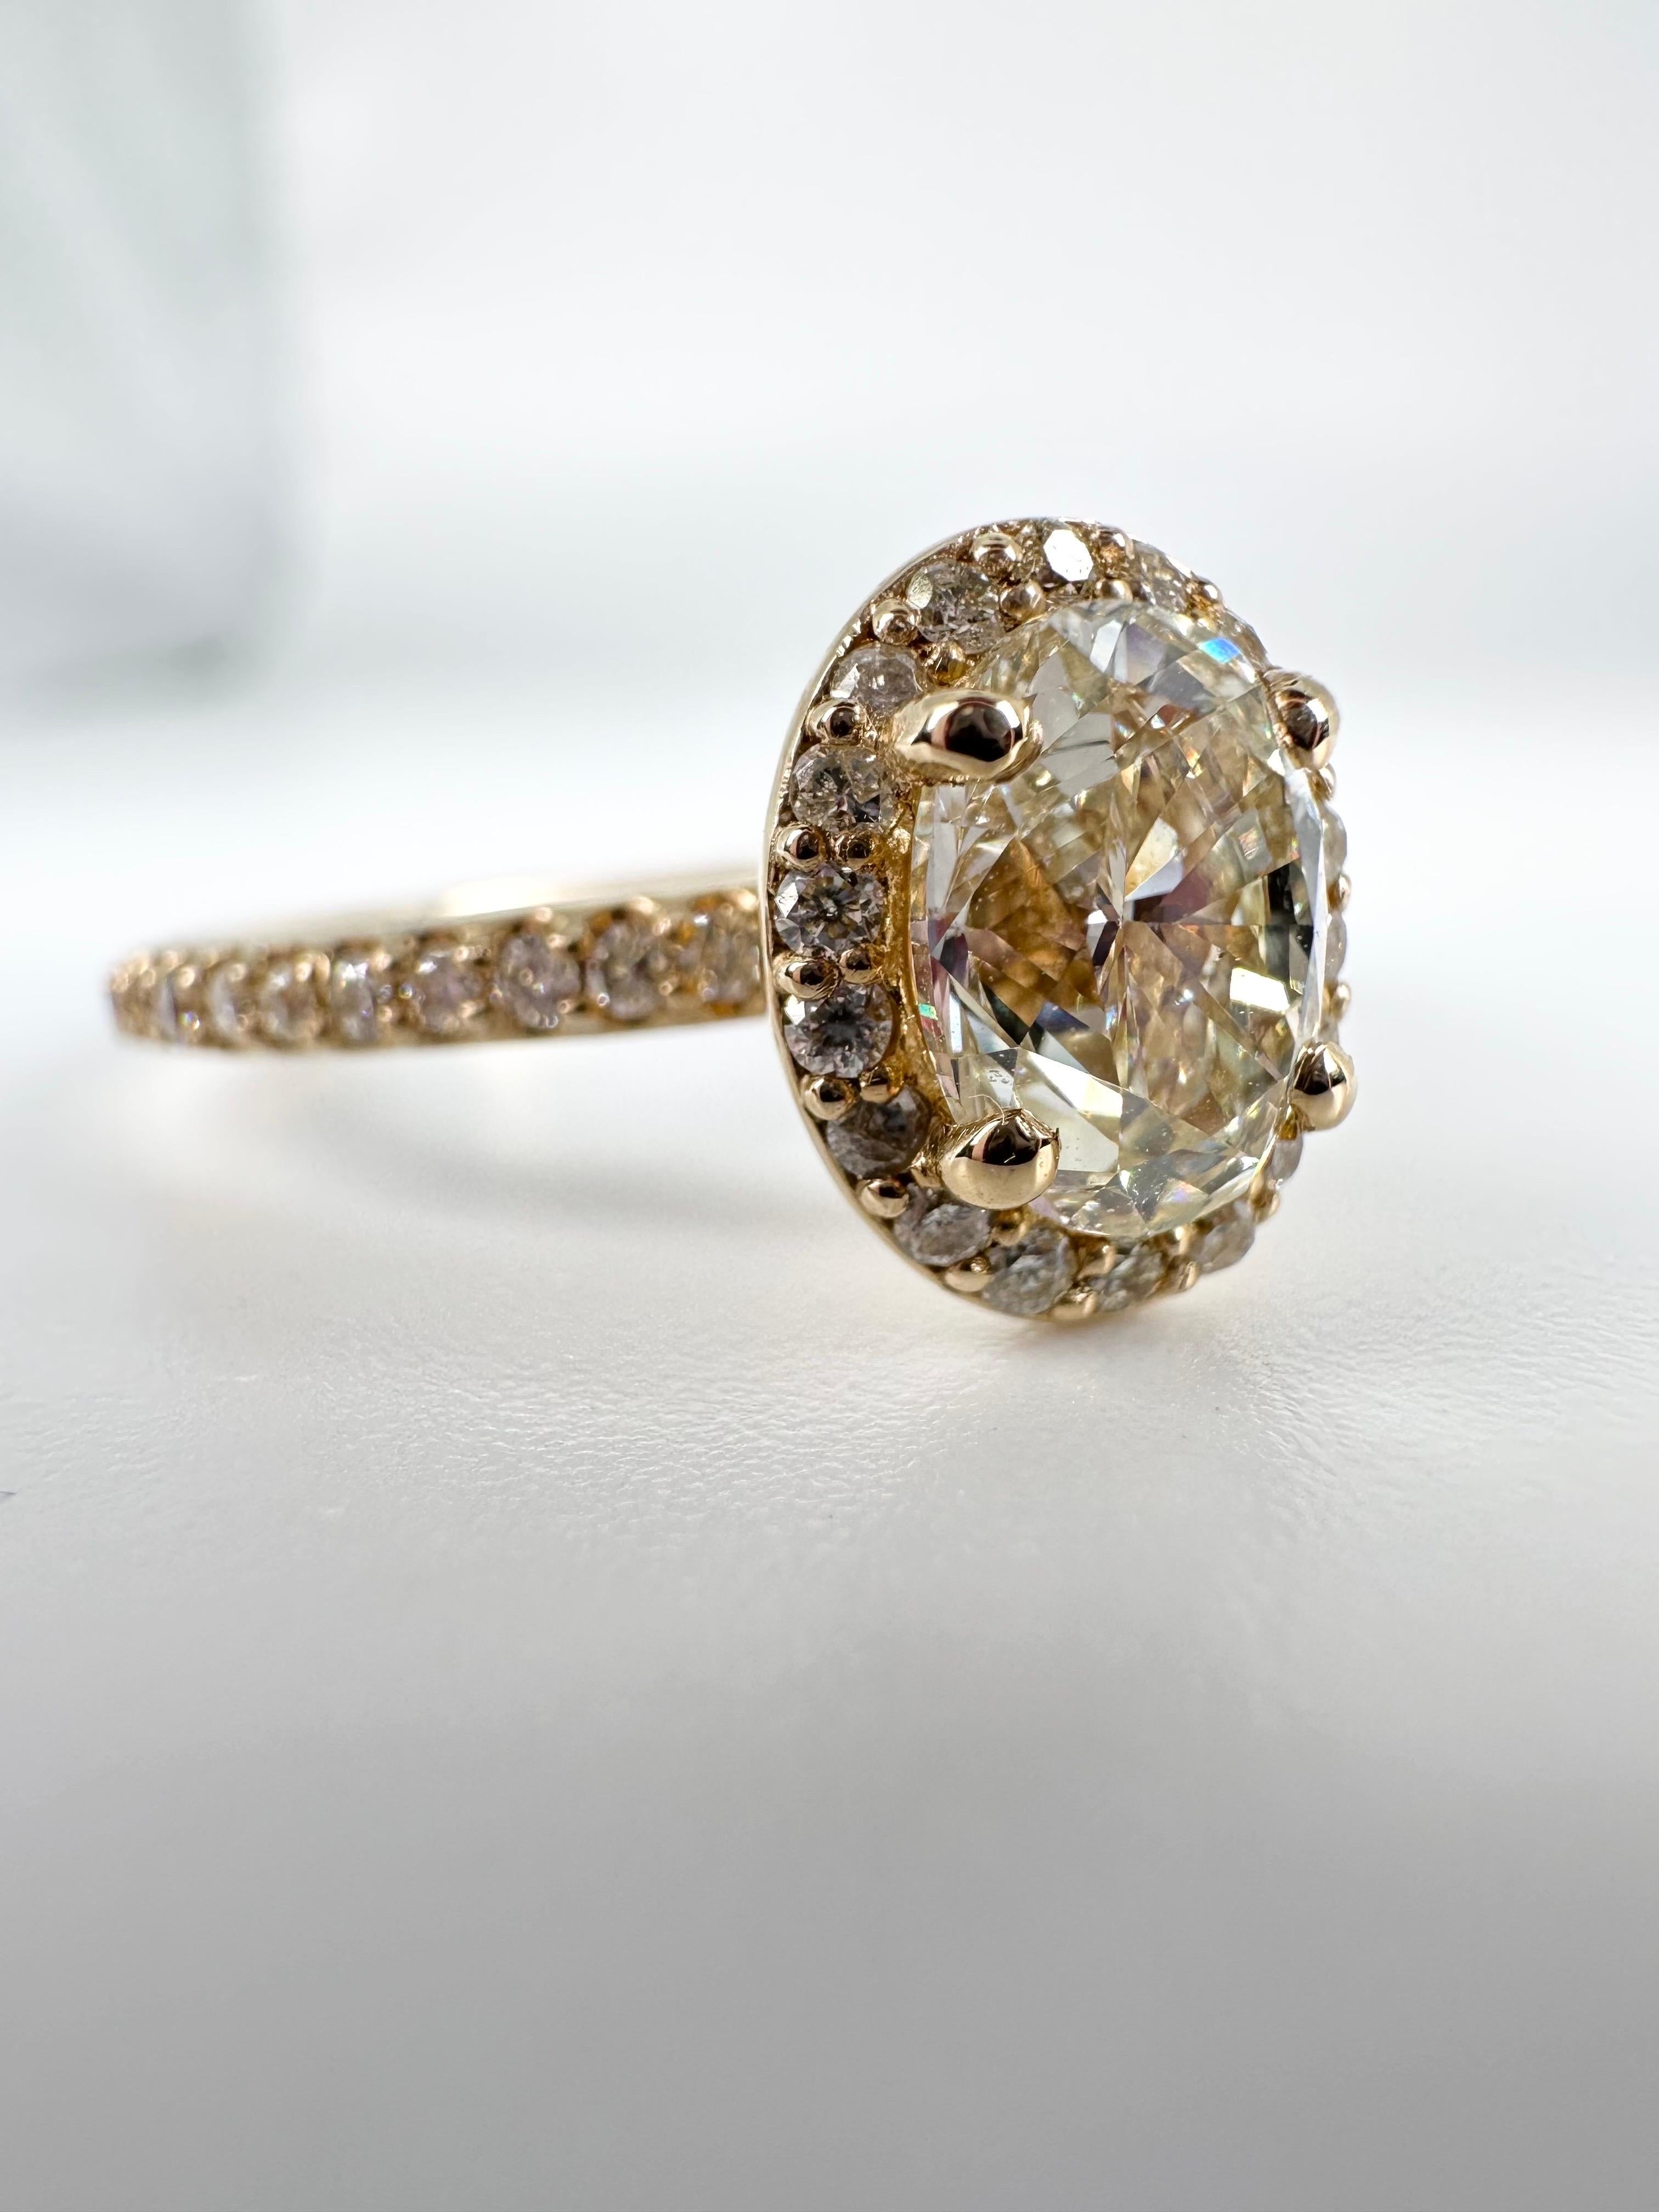 Unique halo engagement ring made with 1.01ct center VS1 clarity and K-L color. The accompanying diamonds are weighing 0.40 carats in 14KT yellow gold.

GOLD: 14KT gold
NATURAL DIAMOND(S)
Clarity/Color: VS-SI/H (VS1/L center)
Carat:1.41ct
Cut:Round